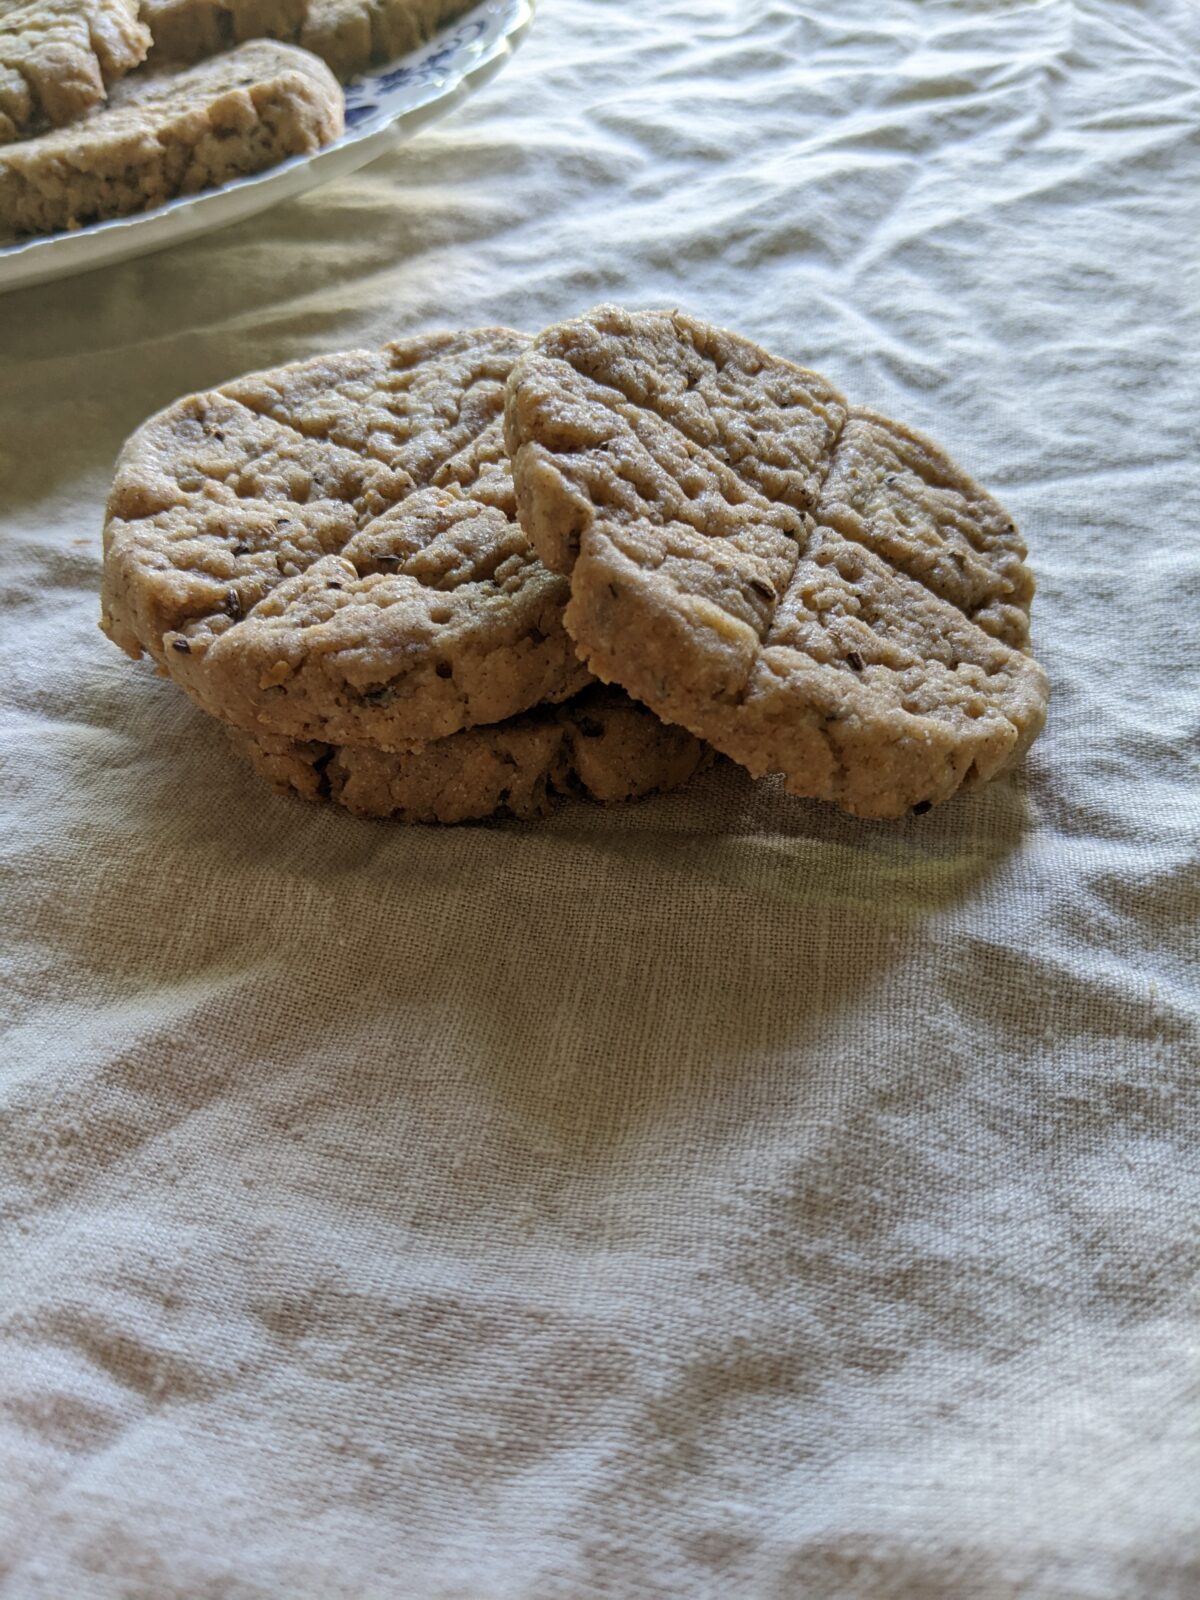 three stacked biscuits on a linen surface with a plate of more biscuits in the background